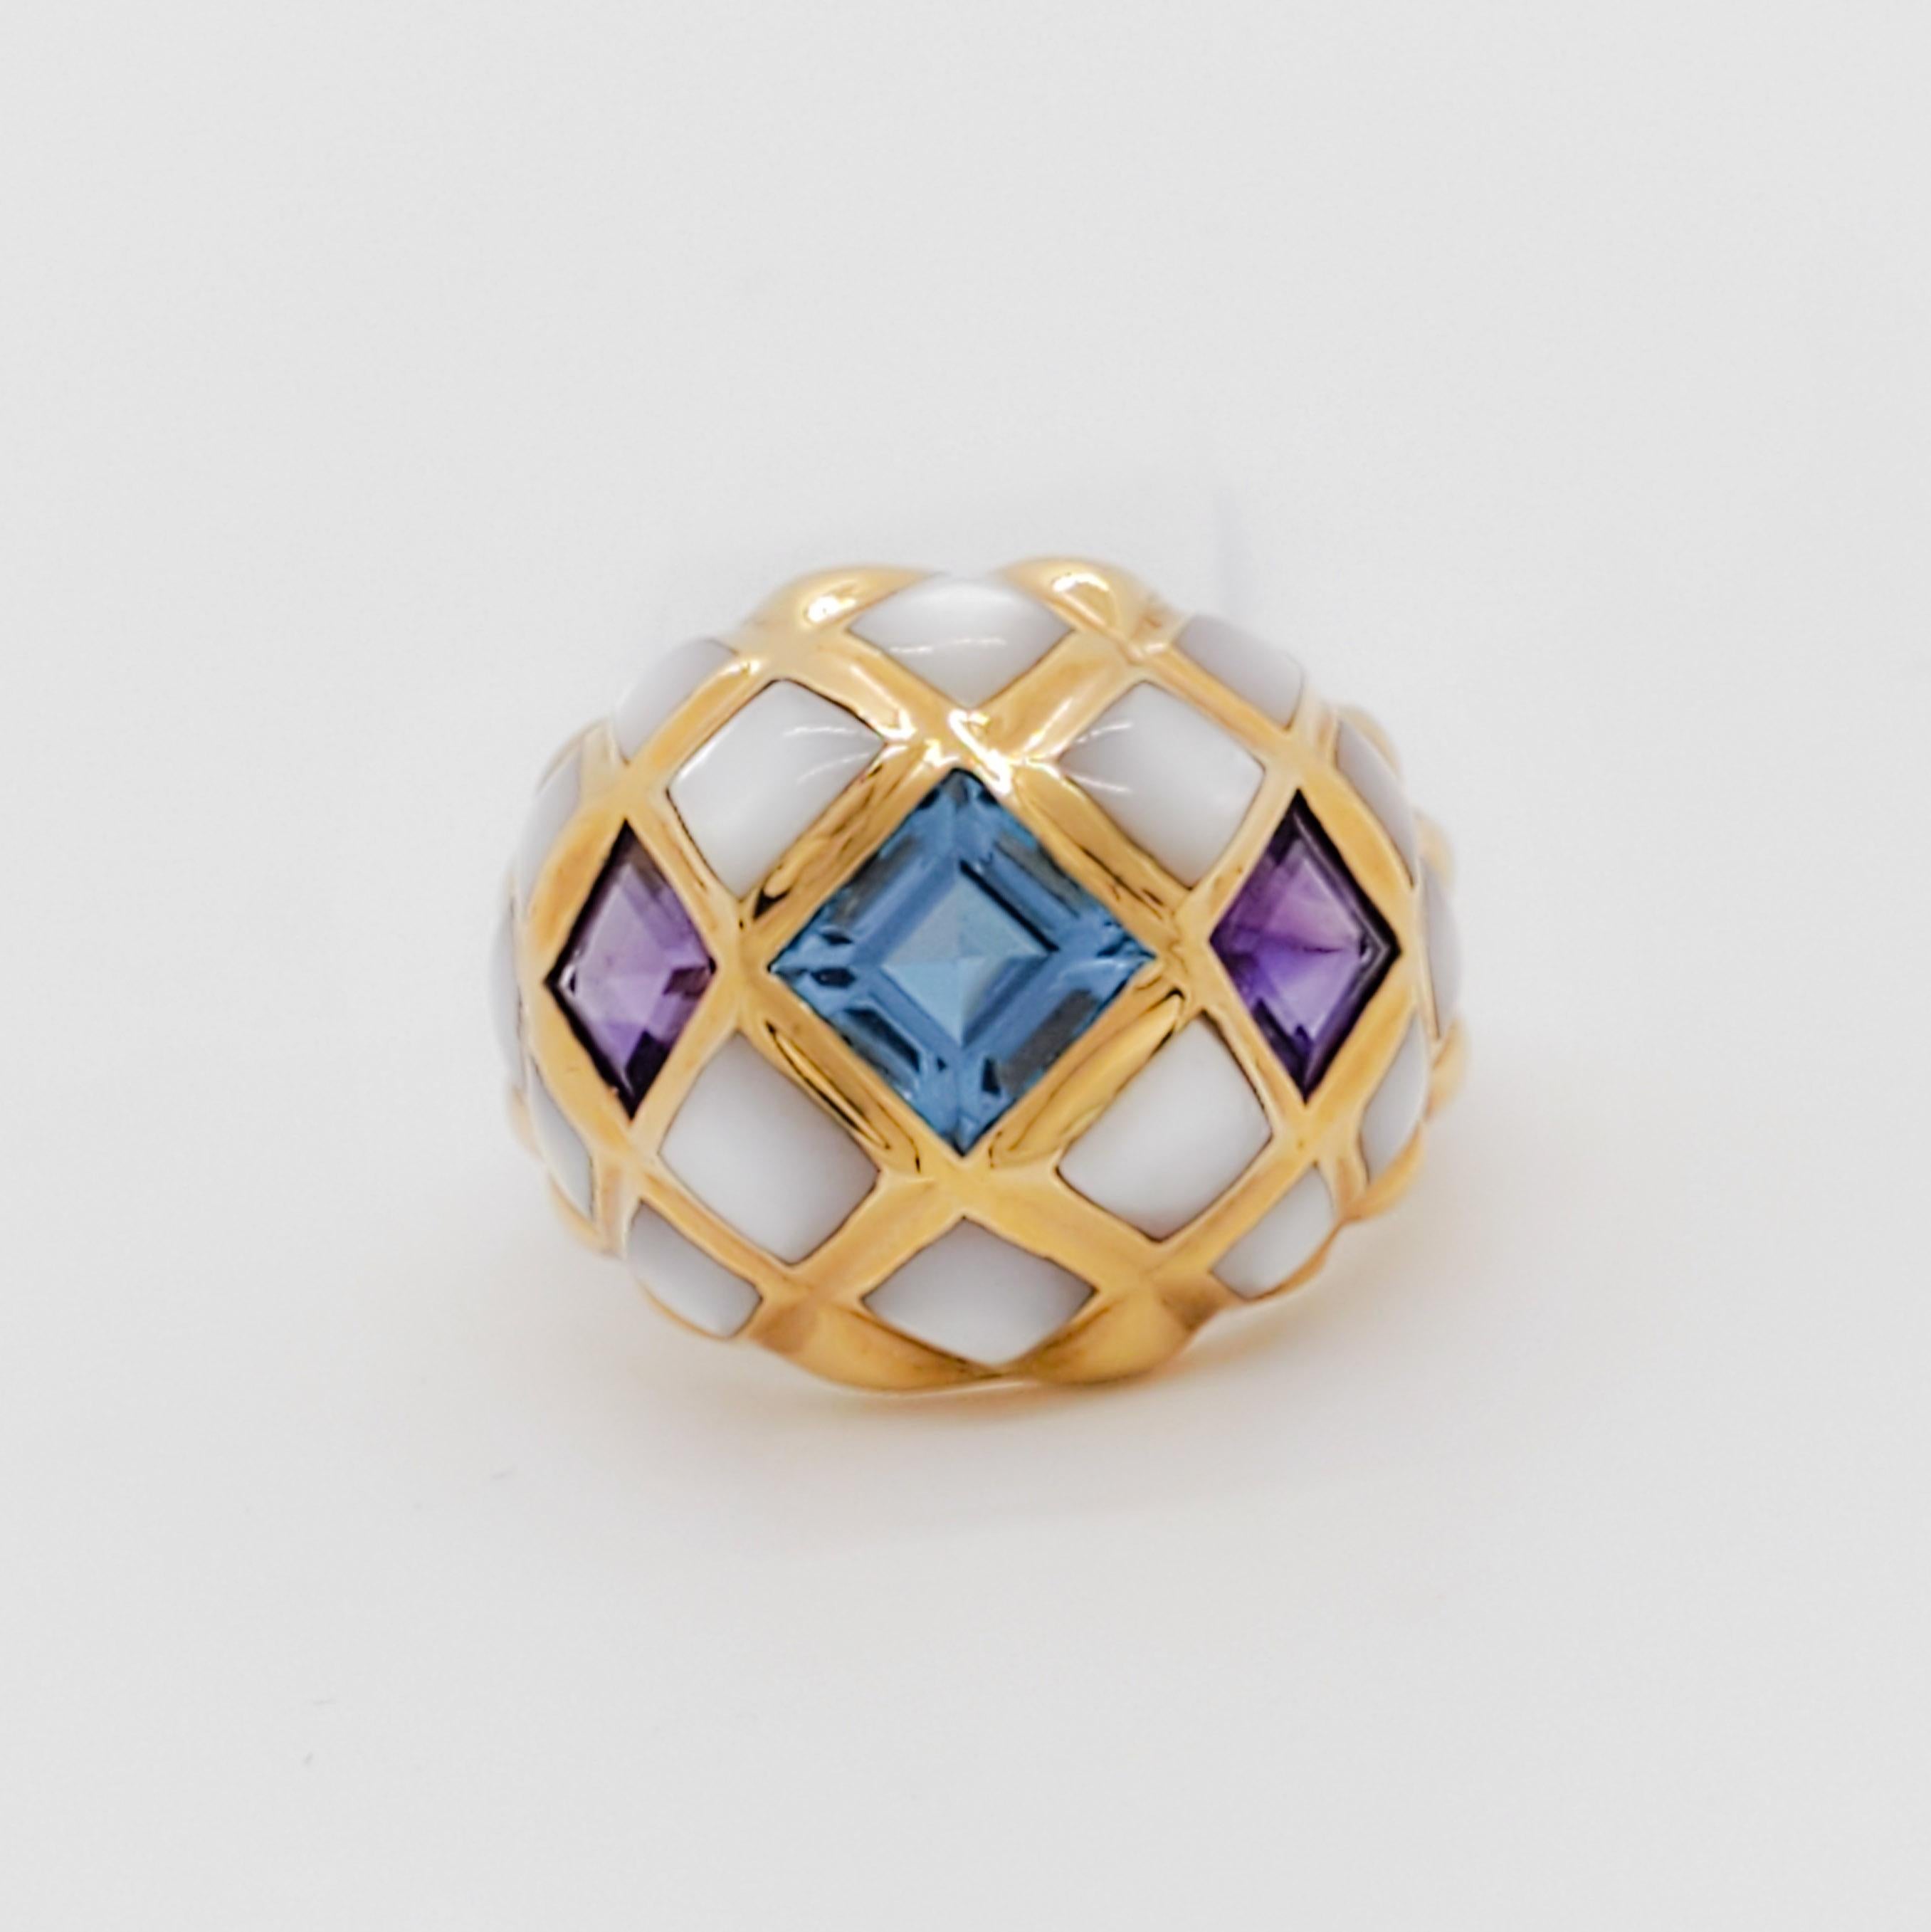 Beautiful Kabana cocktail ring with white mother of pearl, square blue topaz and square amethyst.  Handmade in 14k yellow gold.  